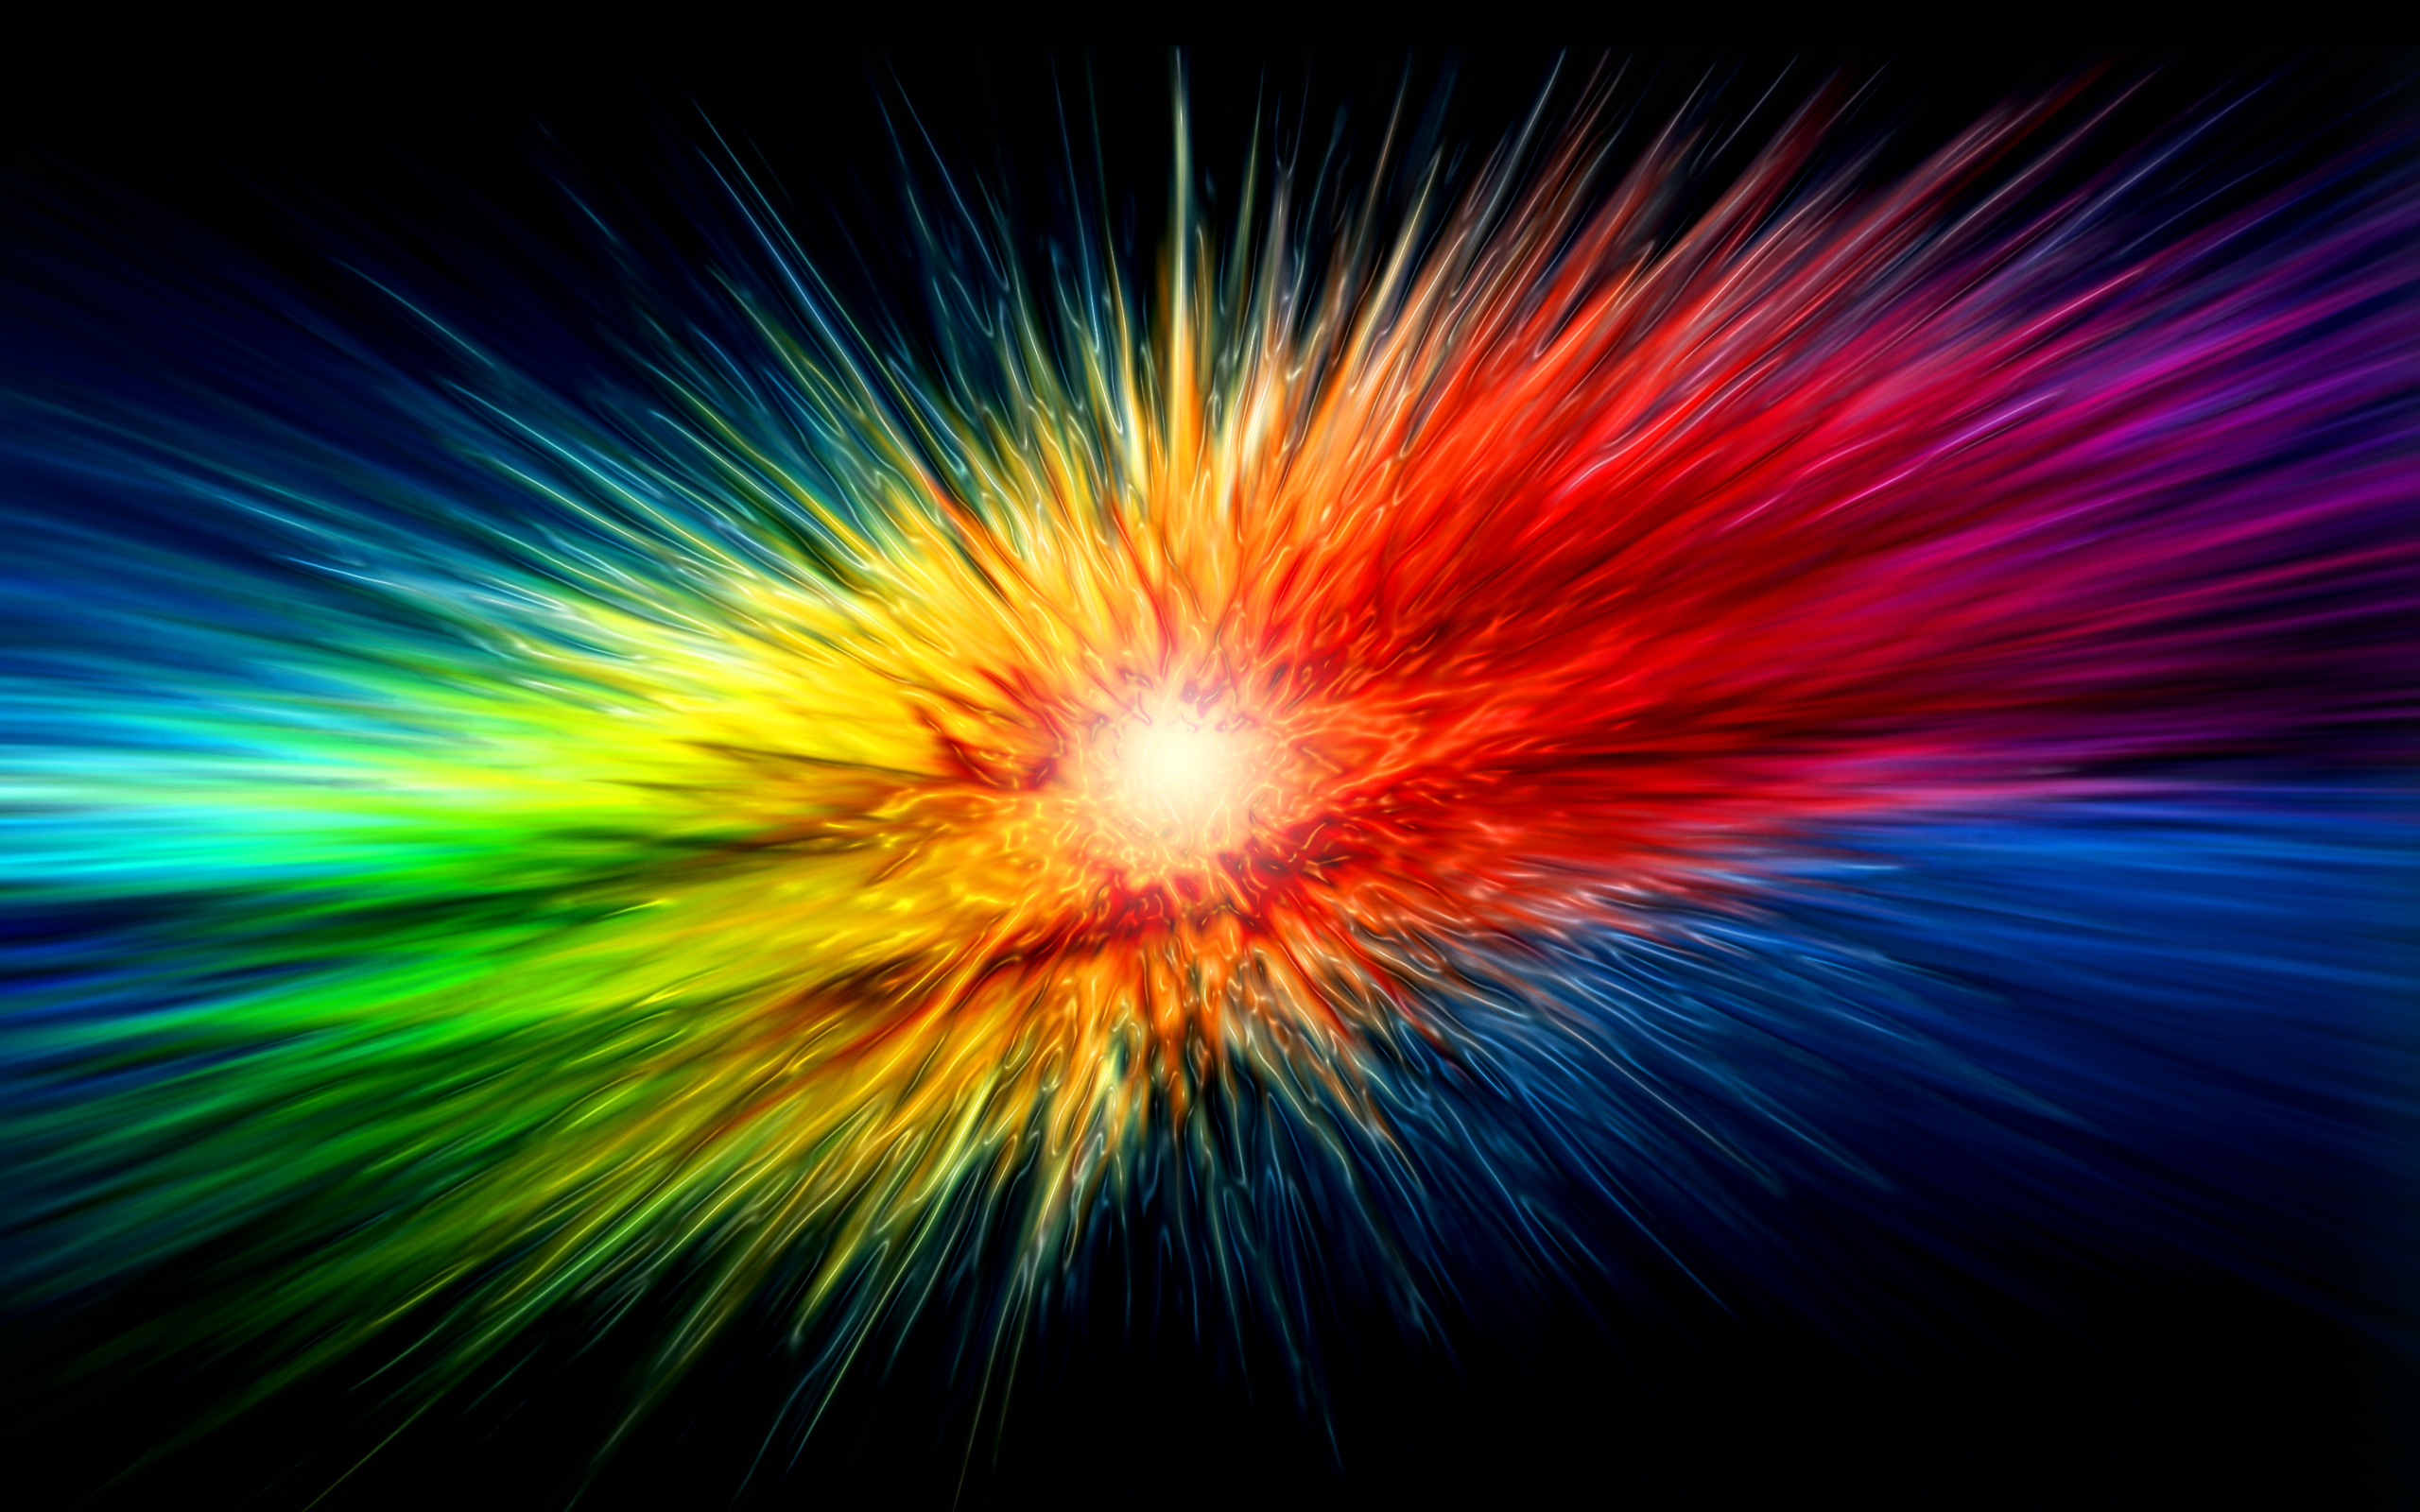 Vibrant color explosion abstract HD wallpaper for desktop background.